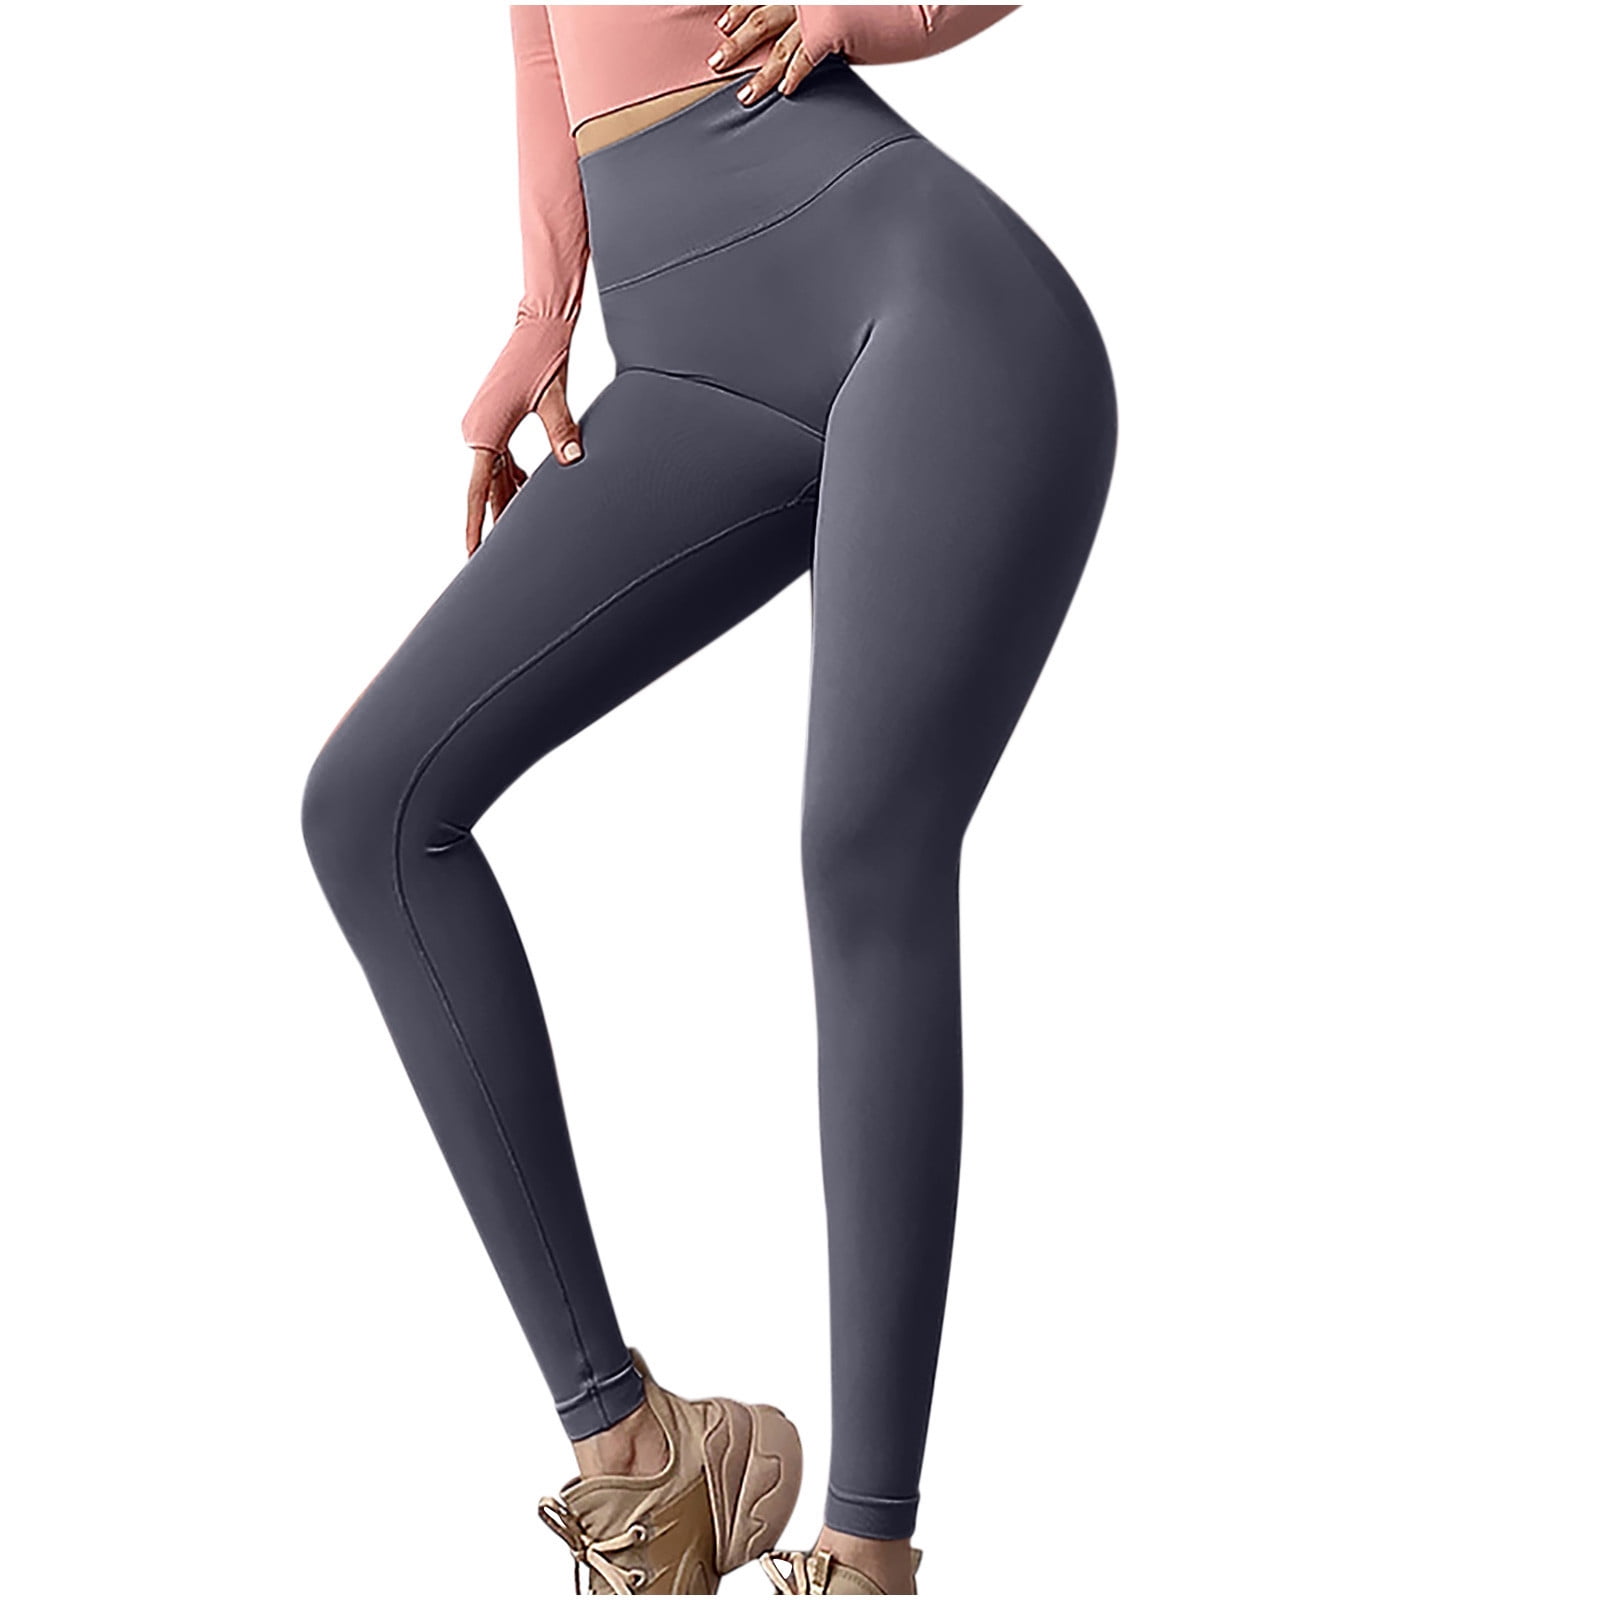 XFLWAM Workout Leggings for Women High Waist Tummy Control Buttery Soft Gym  Sport Yoga Pants Squat Proof Booty Tights Black S 